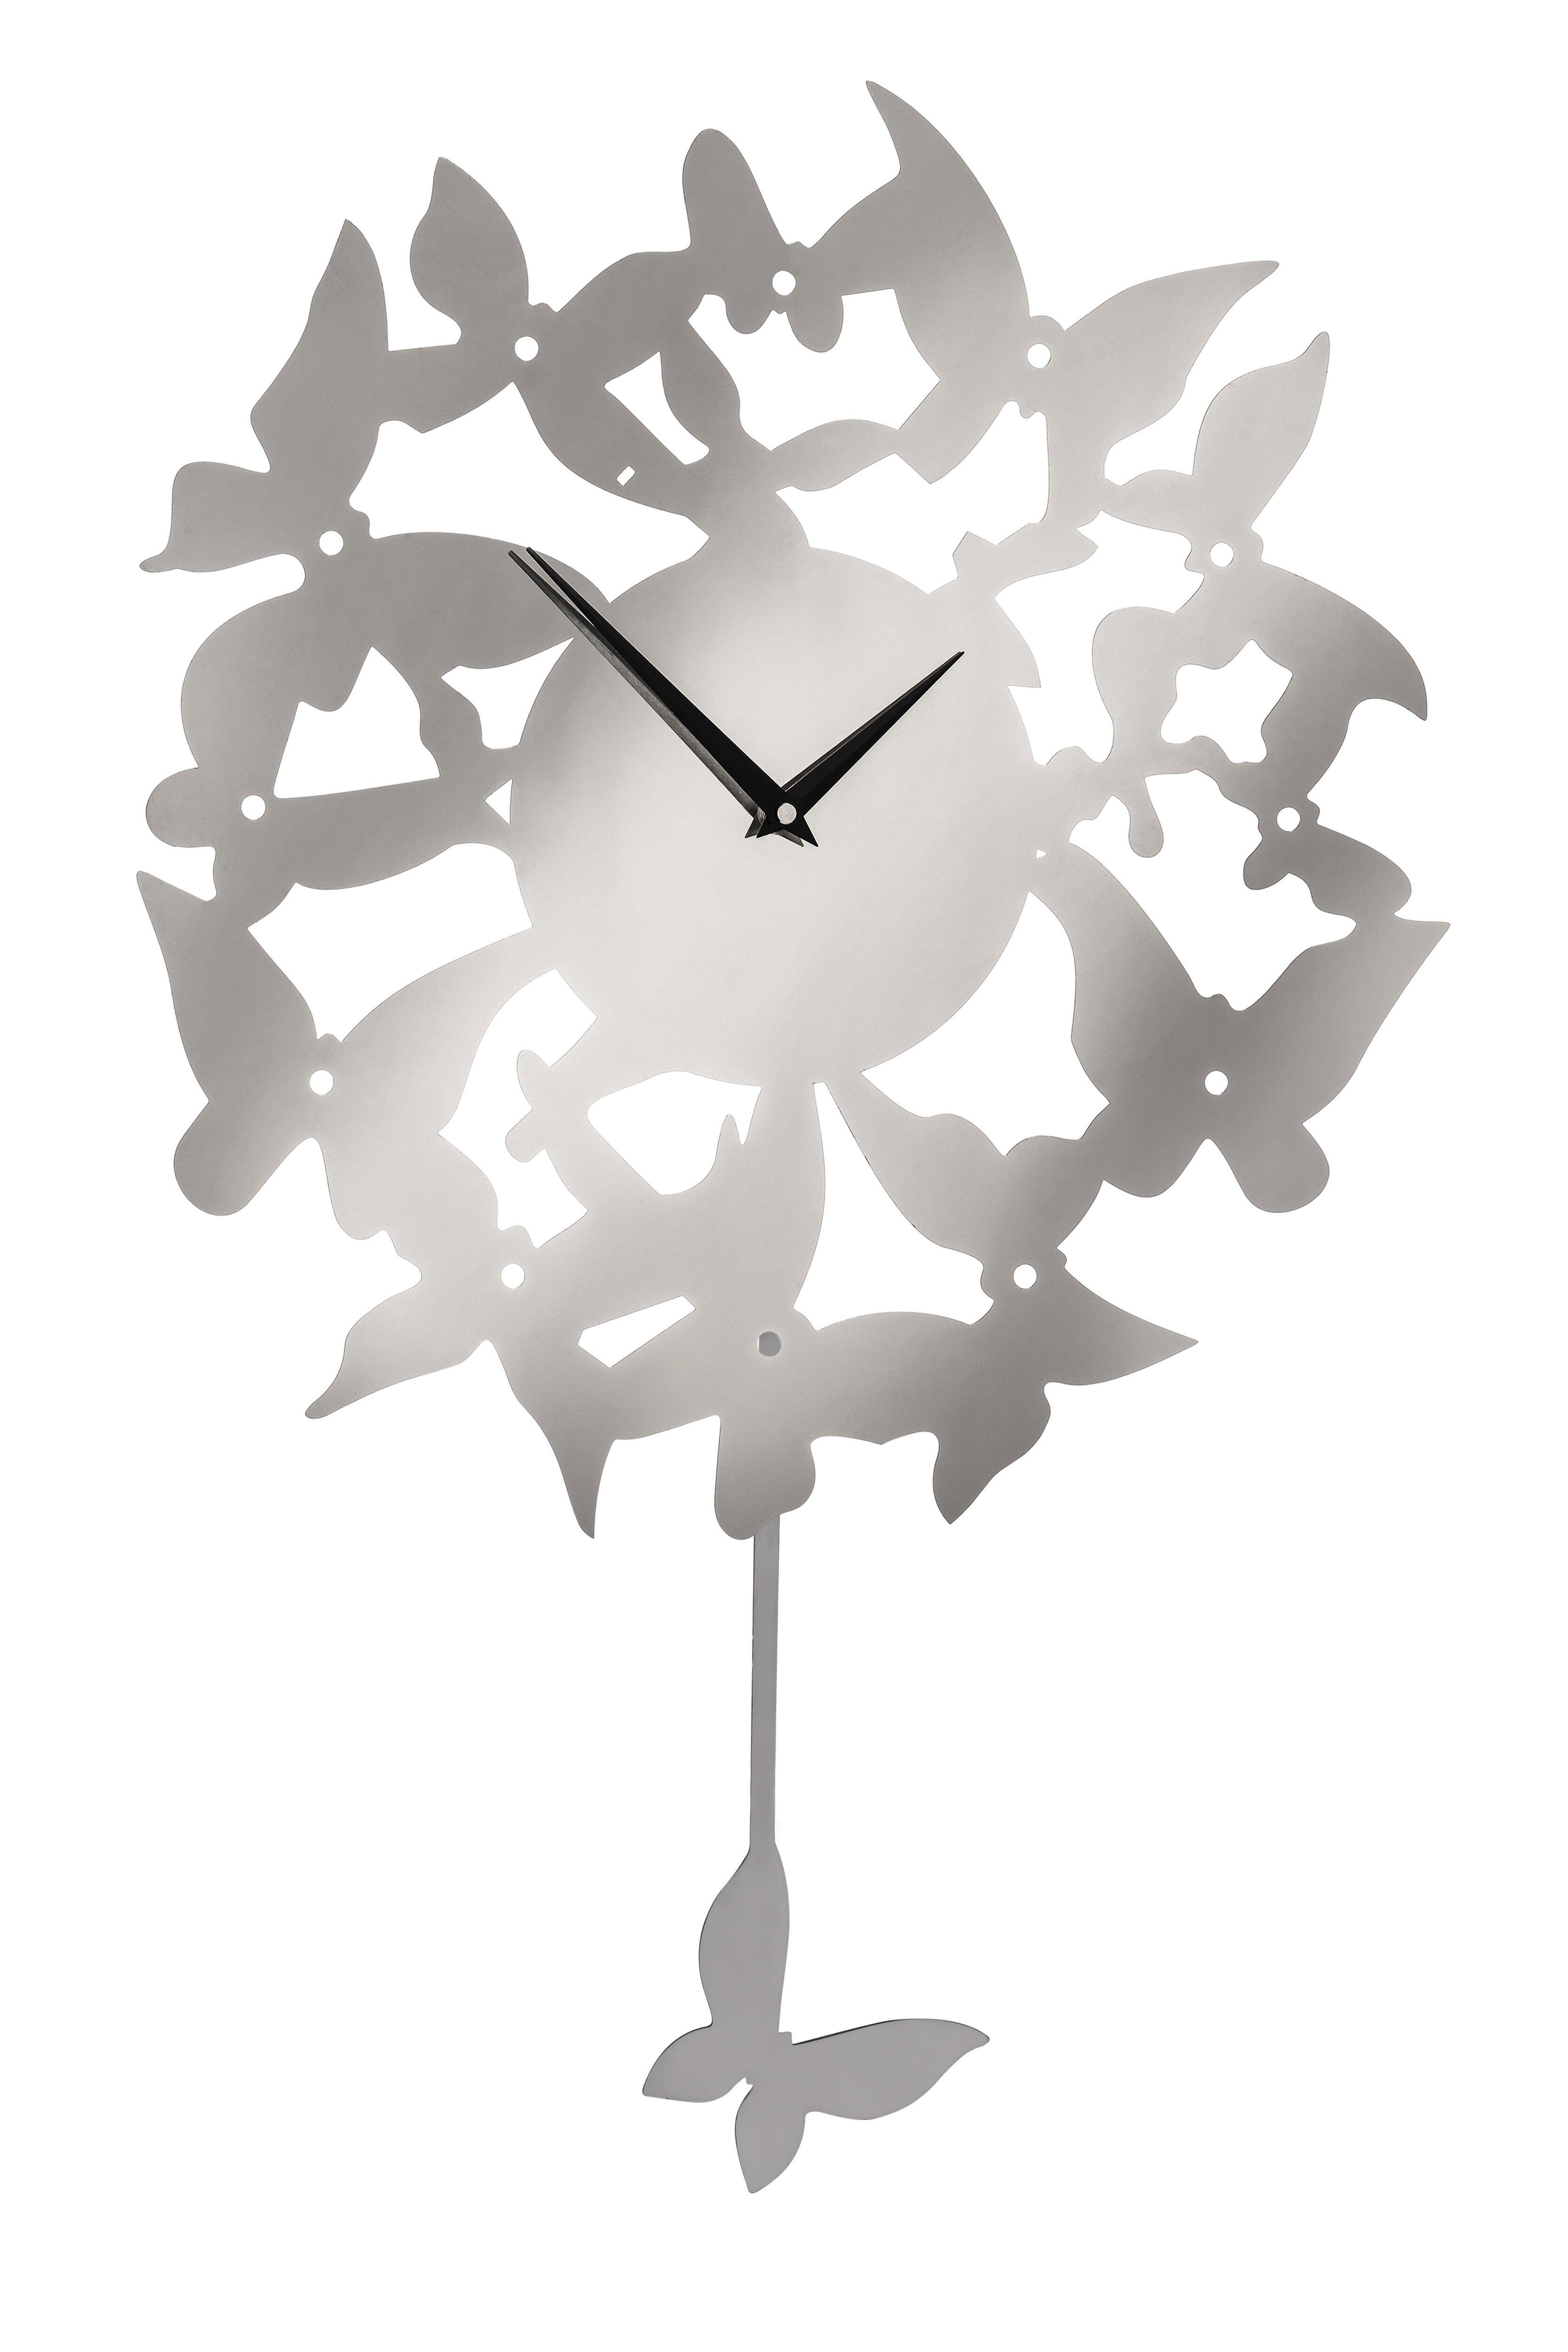 Interiors by Premier Butterflies Stainless Steel Wall Clock